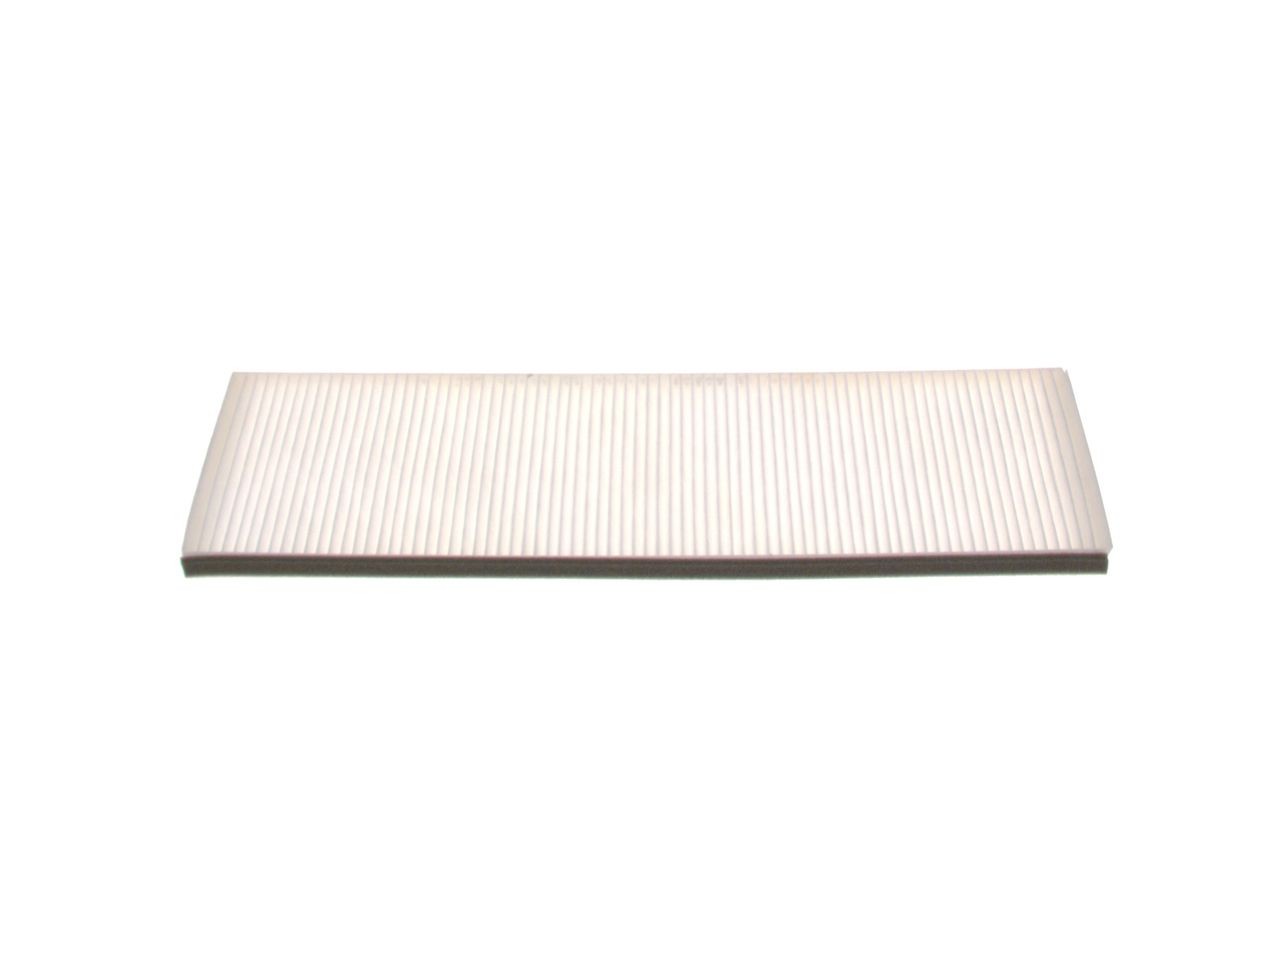 BOSCH 1987431205 Air conditioner filter for rooftop air conditioner, Particulate Filter, 456 mm x 150 mm x 13 mm